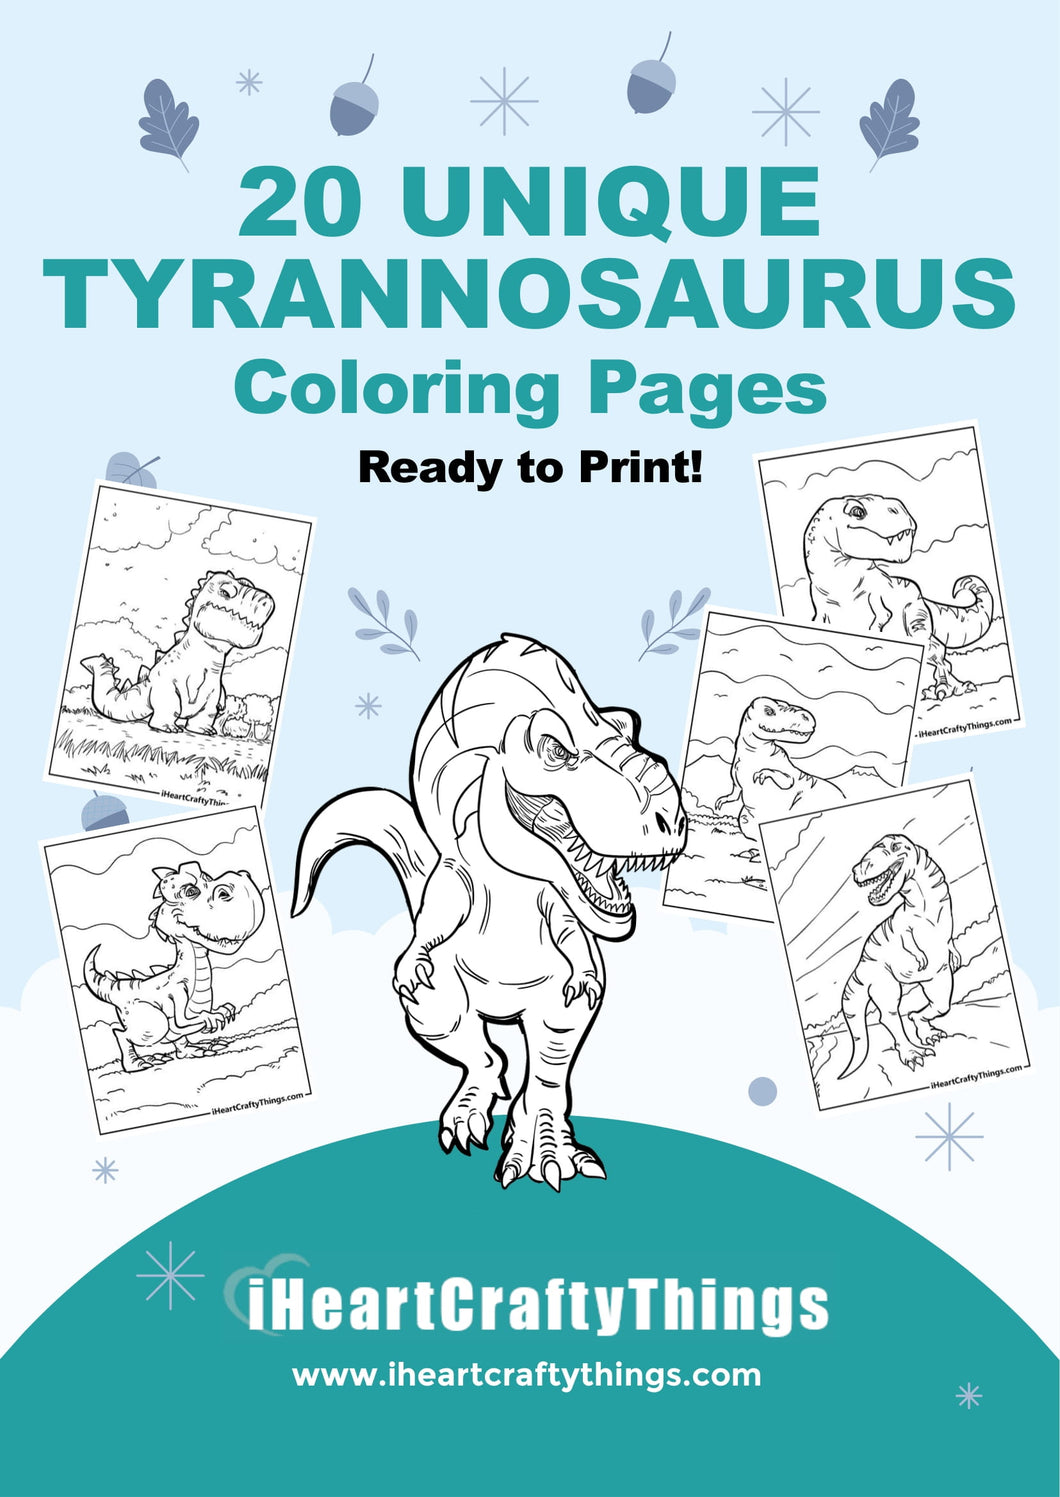 20 TYRANNOSAURUS COLORING PAGES